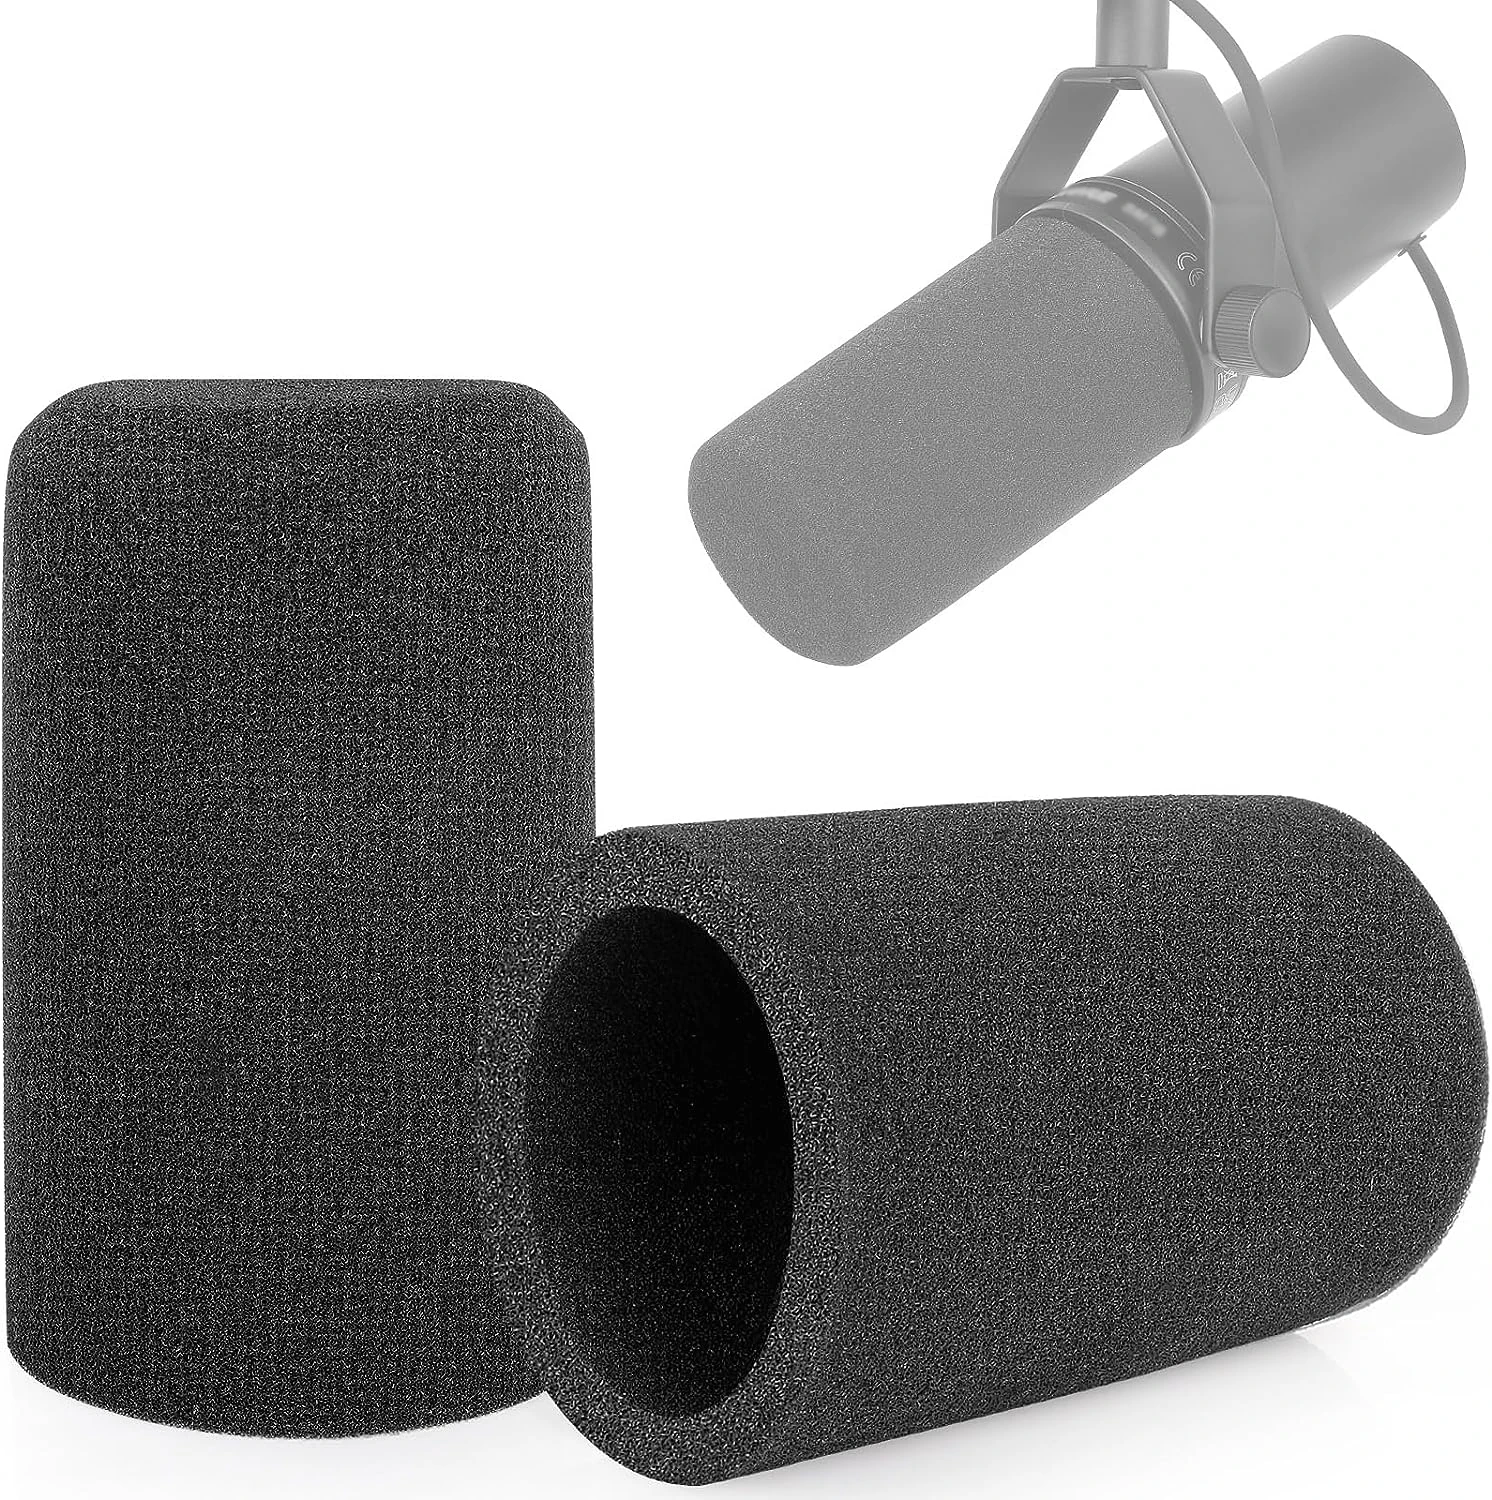 

Windscreen for Shure SM7B Microphone Pop Filter Cover Professional Noise Reduction Sponge Foam Replacement for SM7B Mic